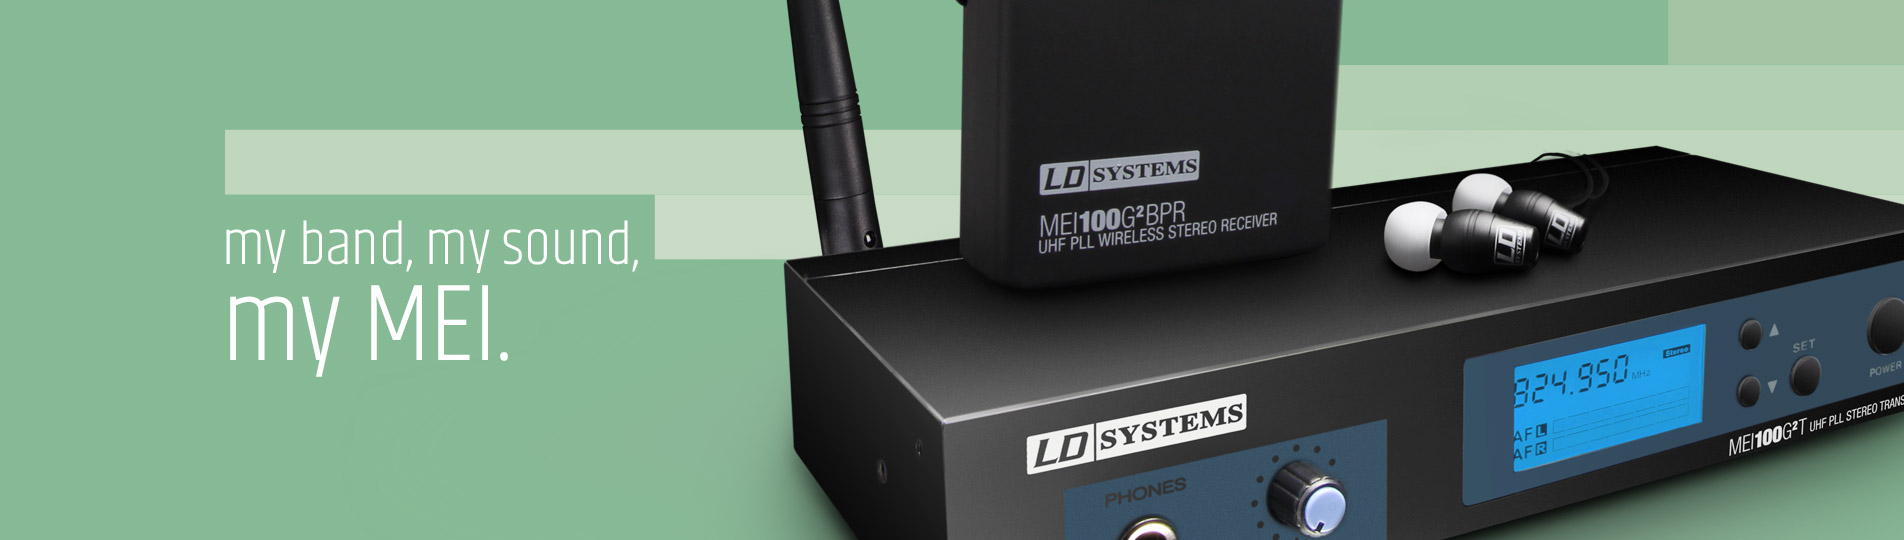 LD Systems MEI 100 G2